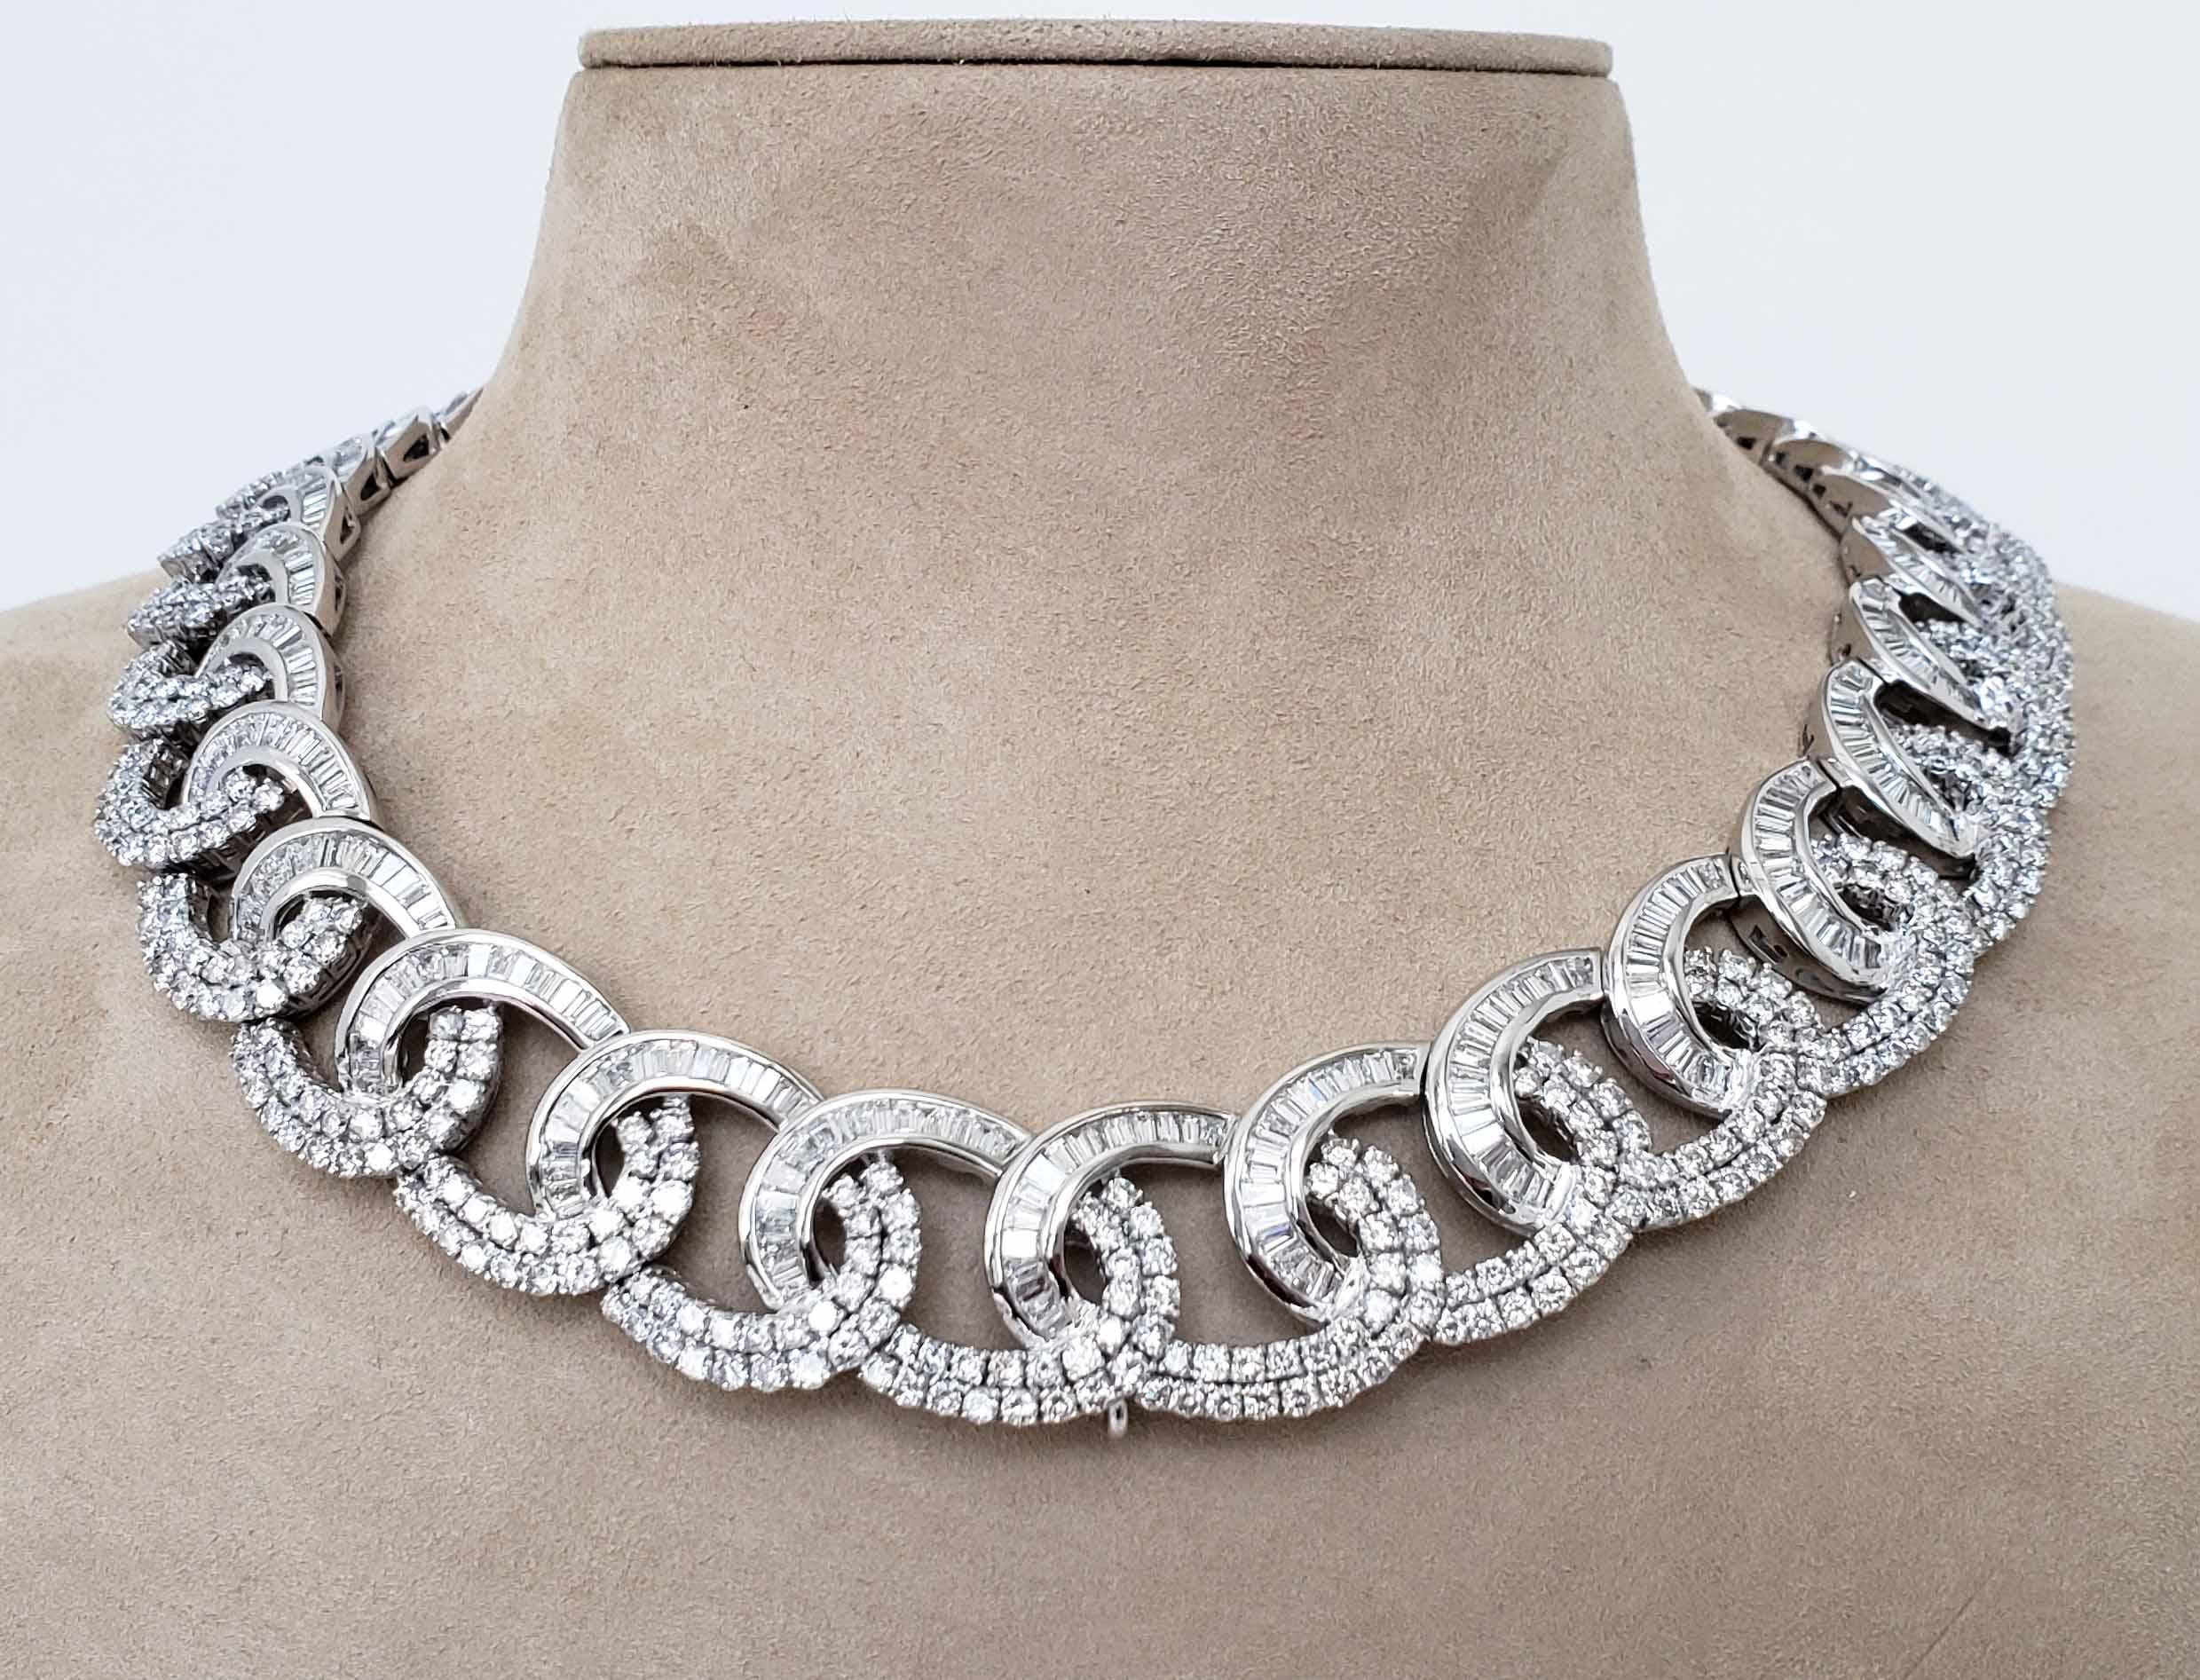 Women's or Men's Scarselli Cuban Diamond Link Necklace 54.50 Carats